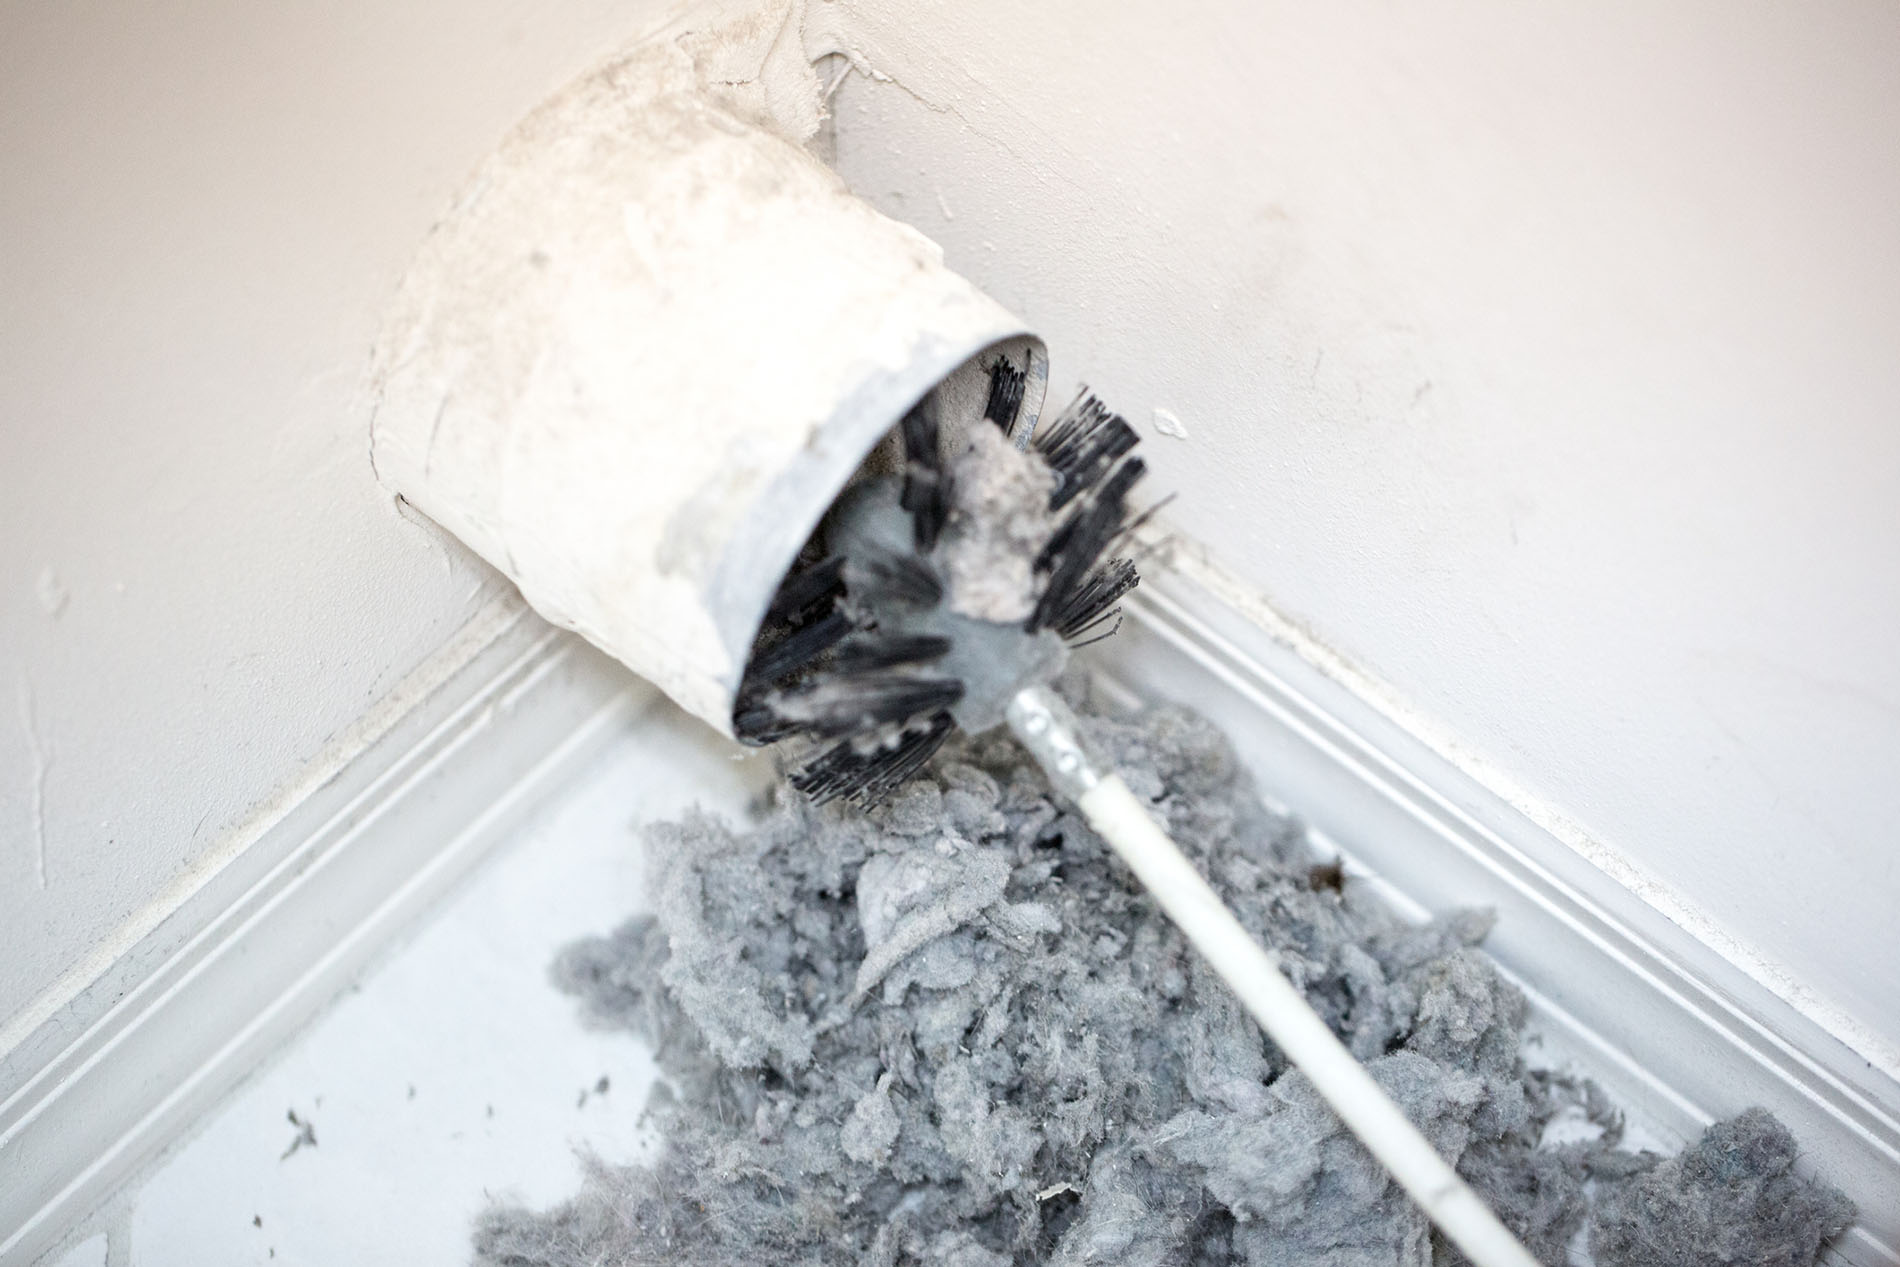 Dryer vent in a home being cleaned out with a round brush. There is a large pile of lint that has been removed from the vent on a tiled floor.